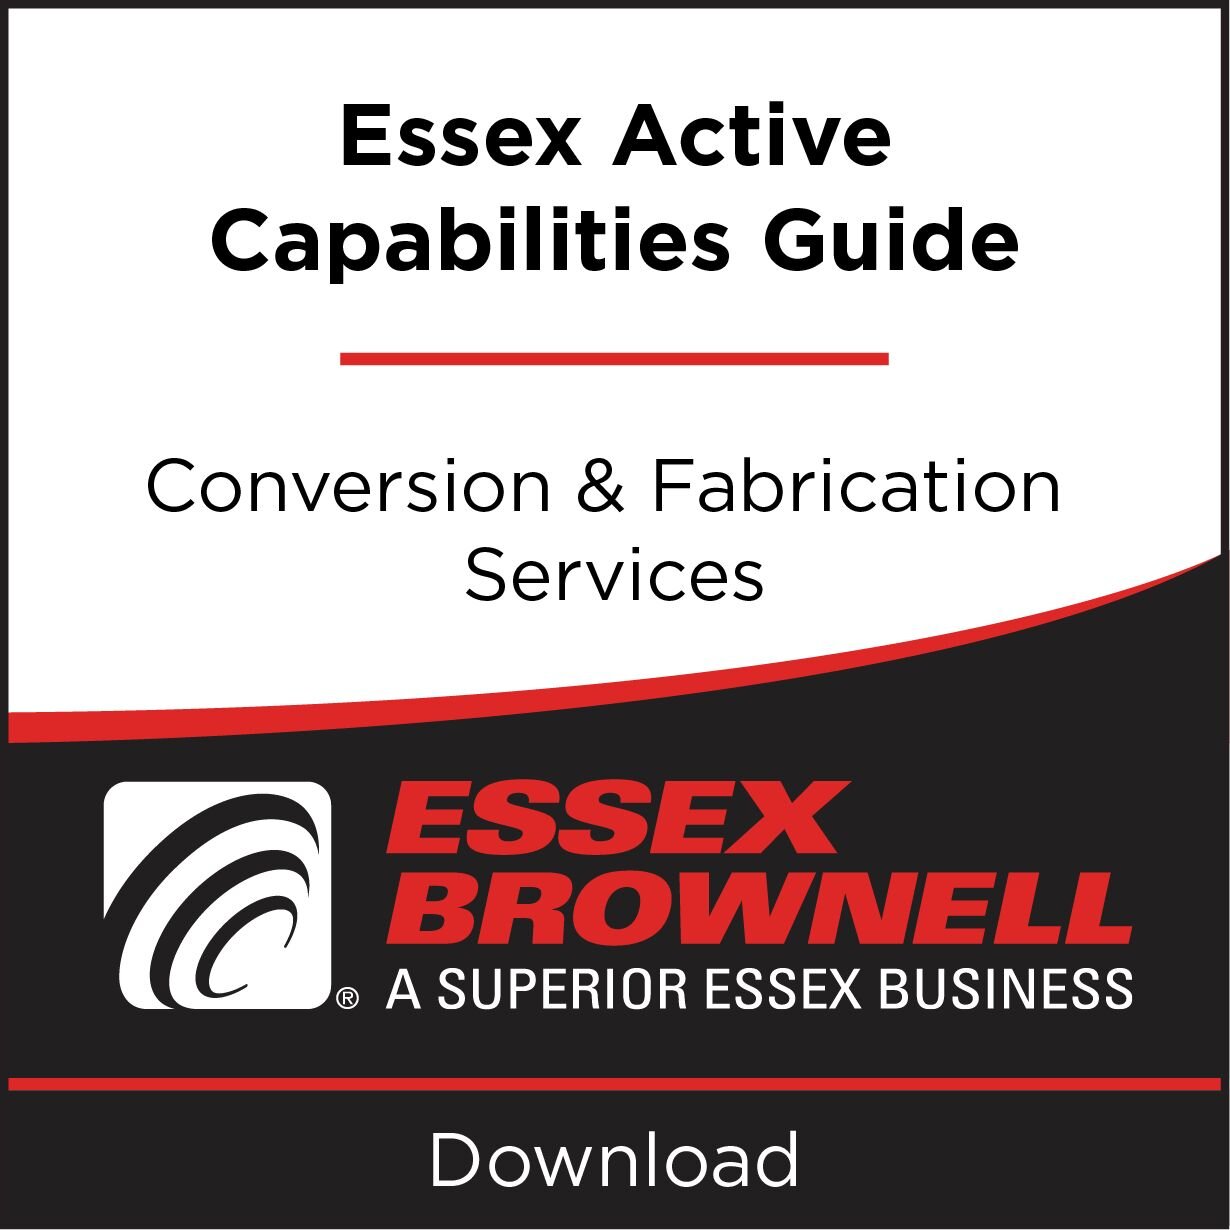 Essex Active Capabilities Guide (Conversion & Fabrication Services)